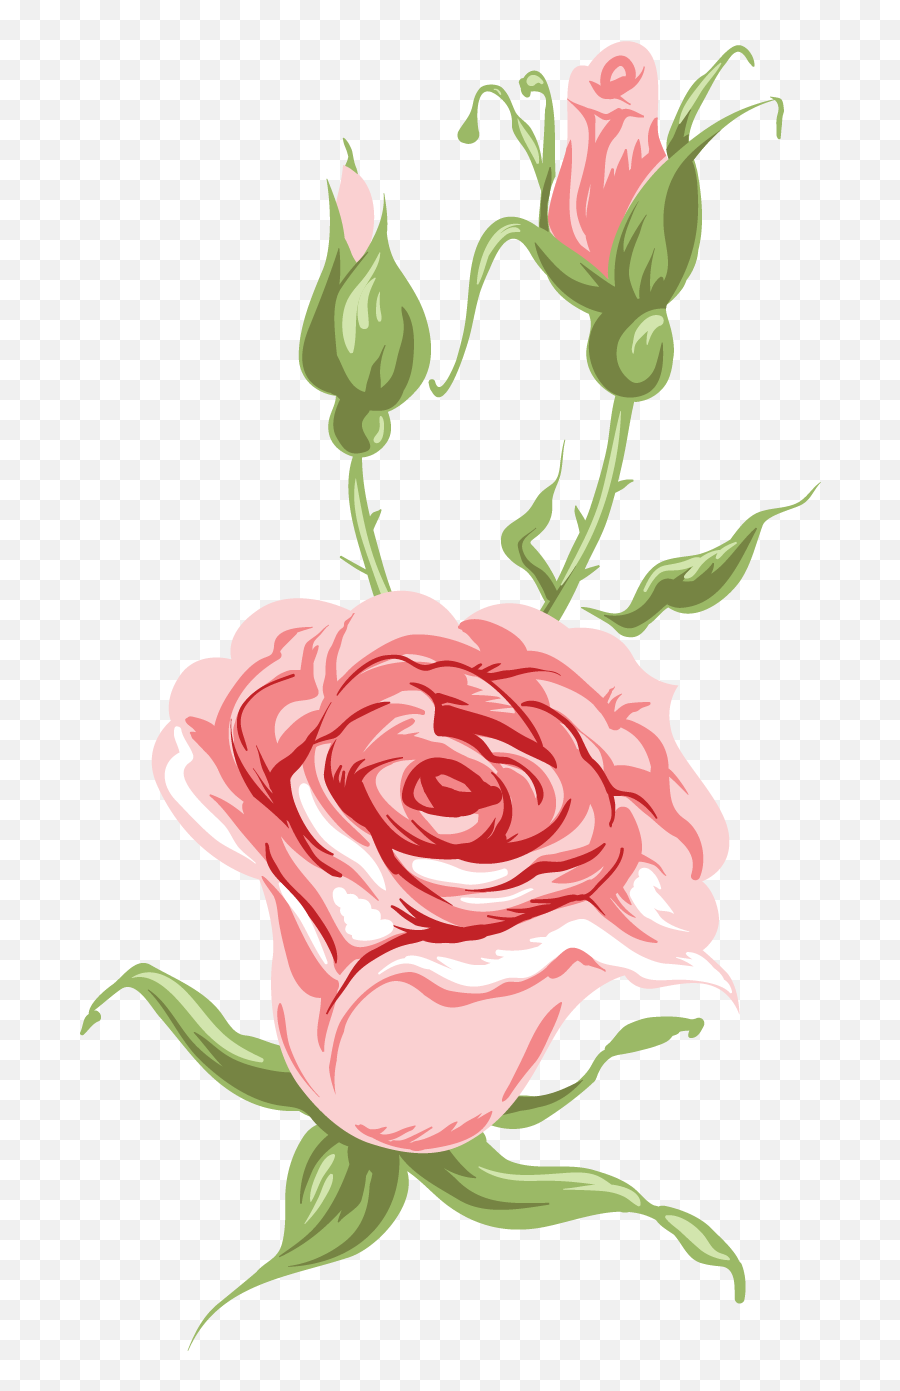 Free Png Downloads - Garden Roses,Florals Png